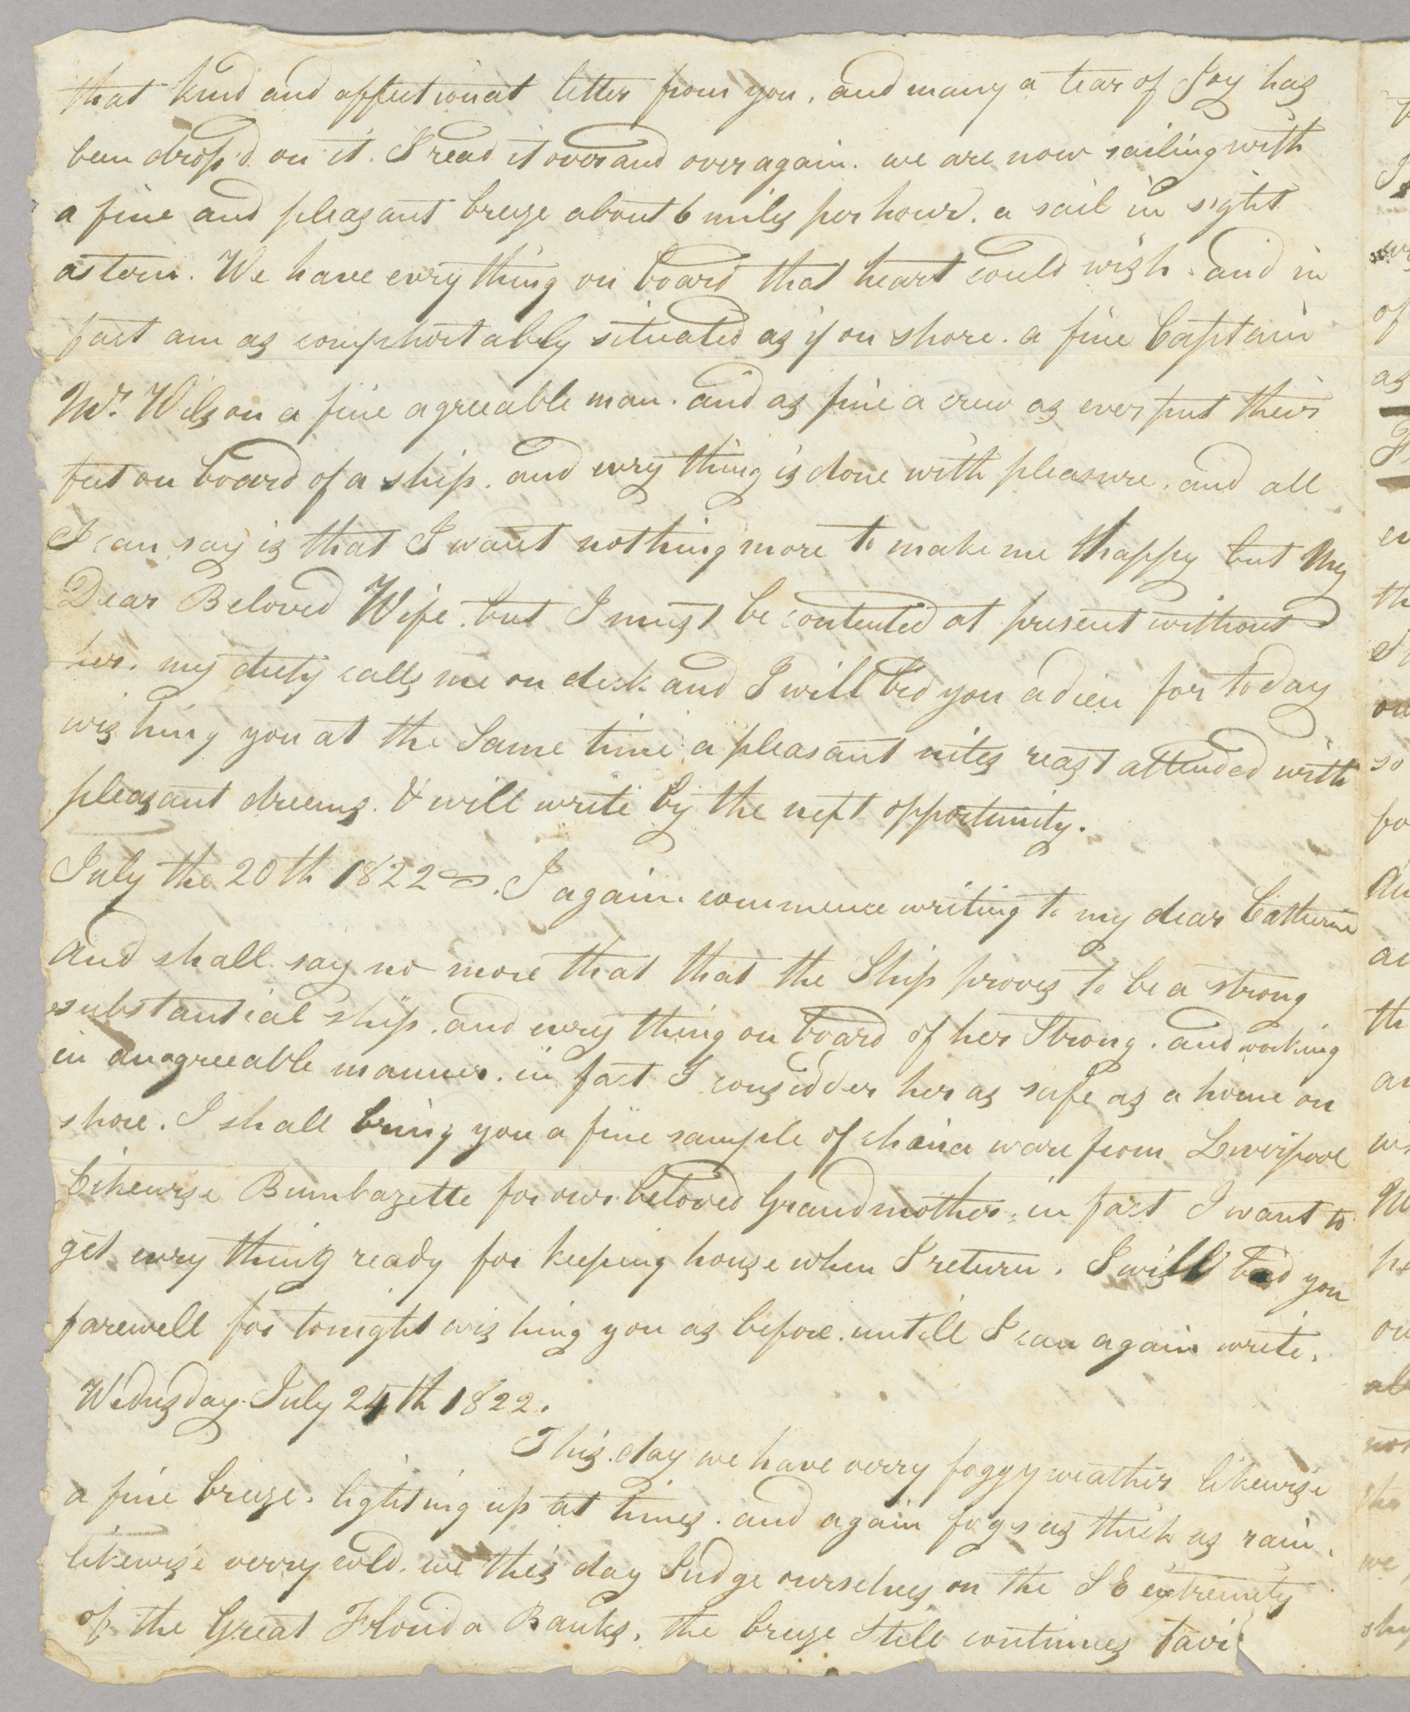 Letter, [Hewlett Townsend Coles], at sea, to "My Dear Beloved Catherine," [Catherine Van Suydam Coles], n.p., Page 2